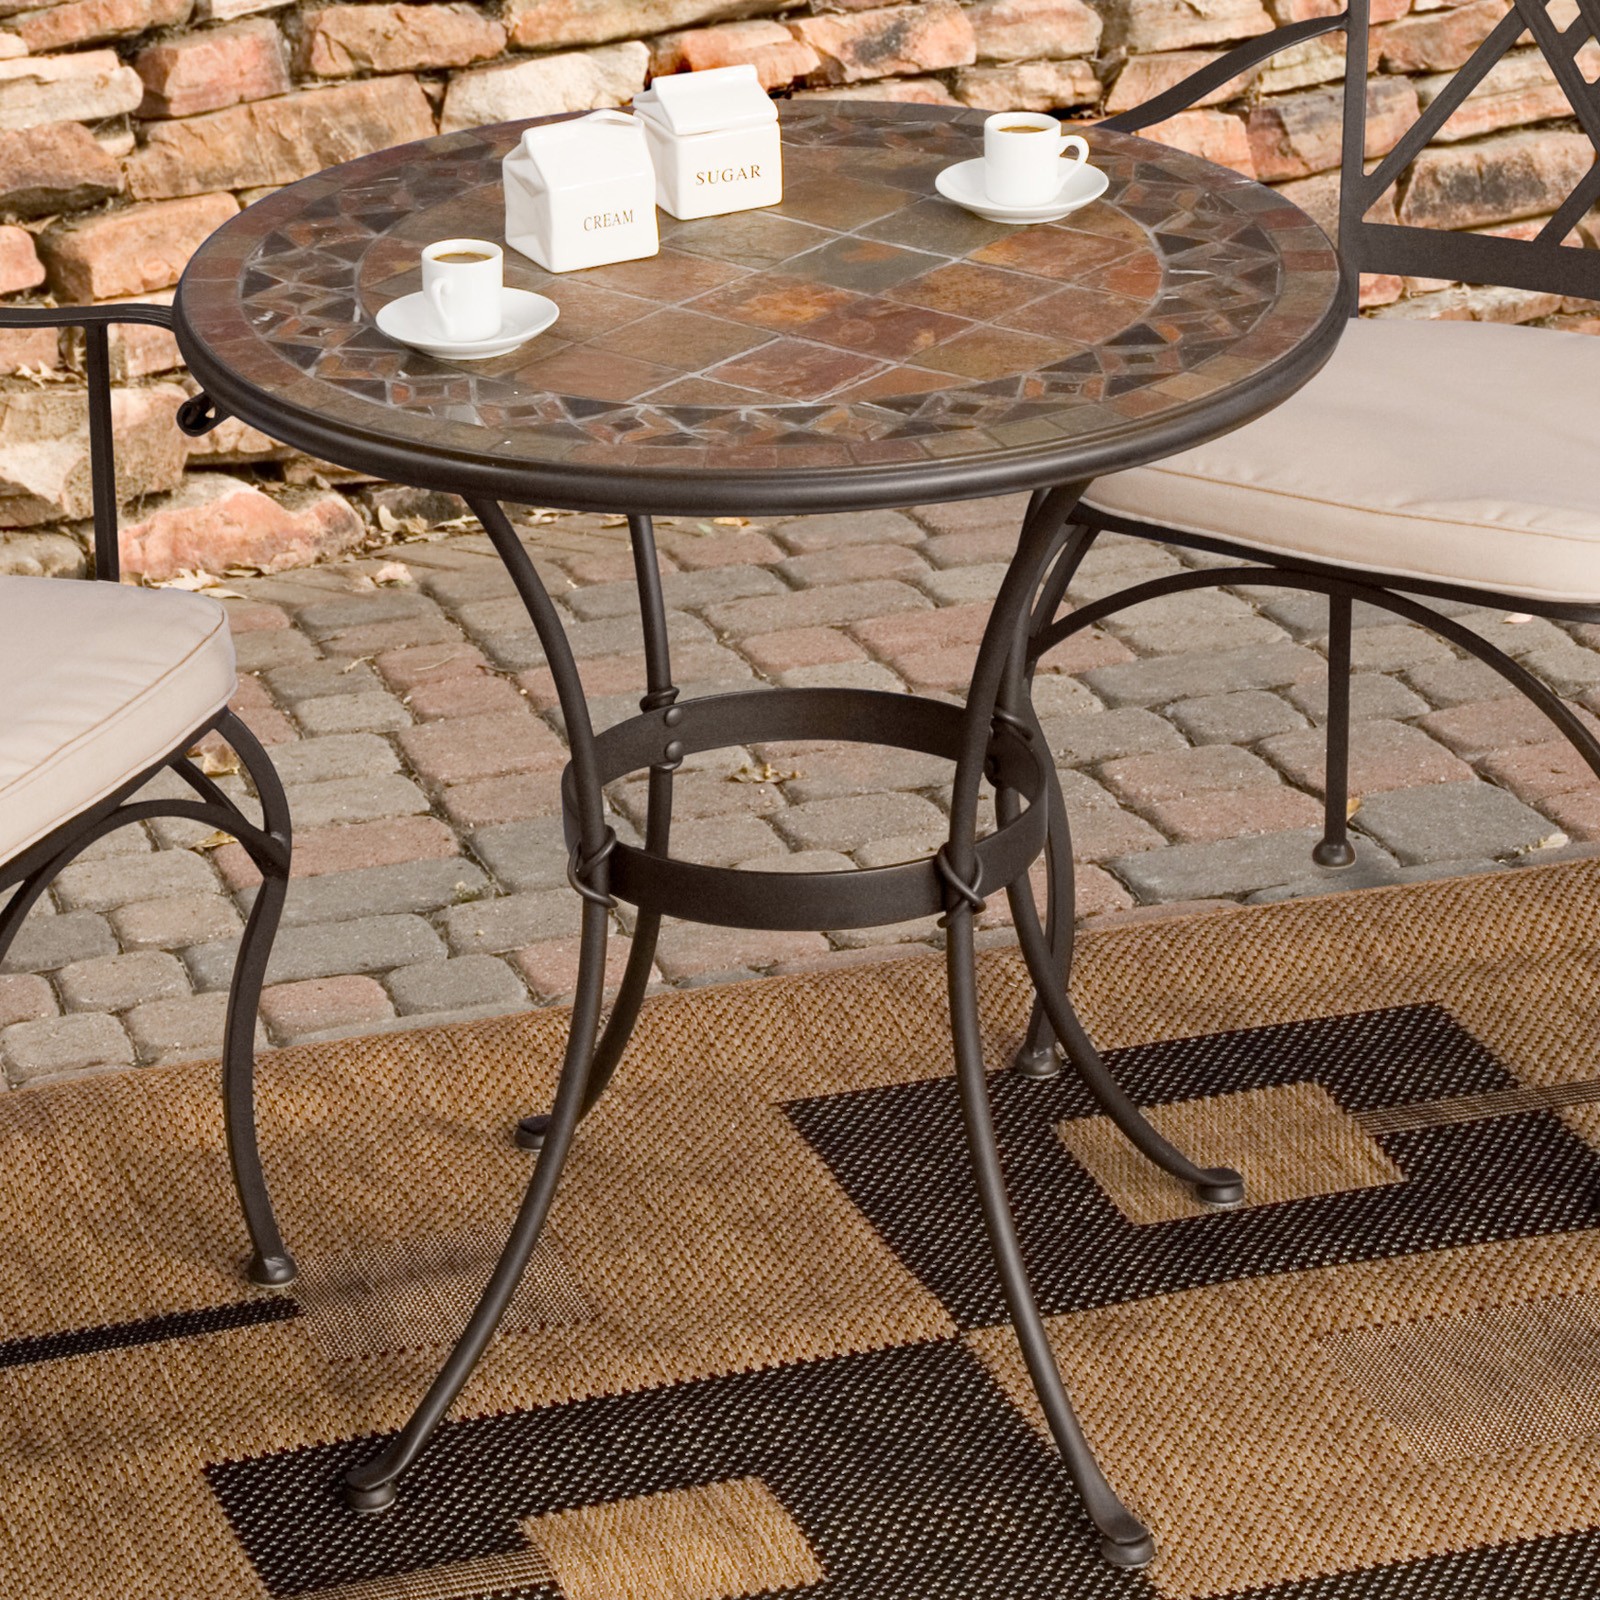 Nicoone Patio Outdoor Bistro Round Dining Table Set of 2 Patio Table Bistro Table Terracotta and White 23.6 Mosaic 